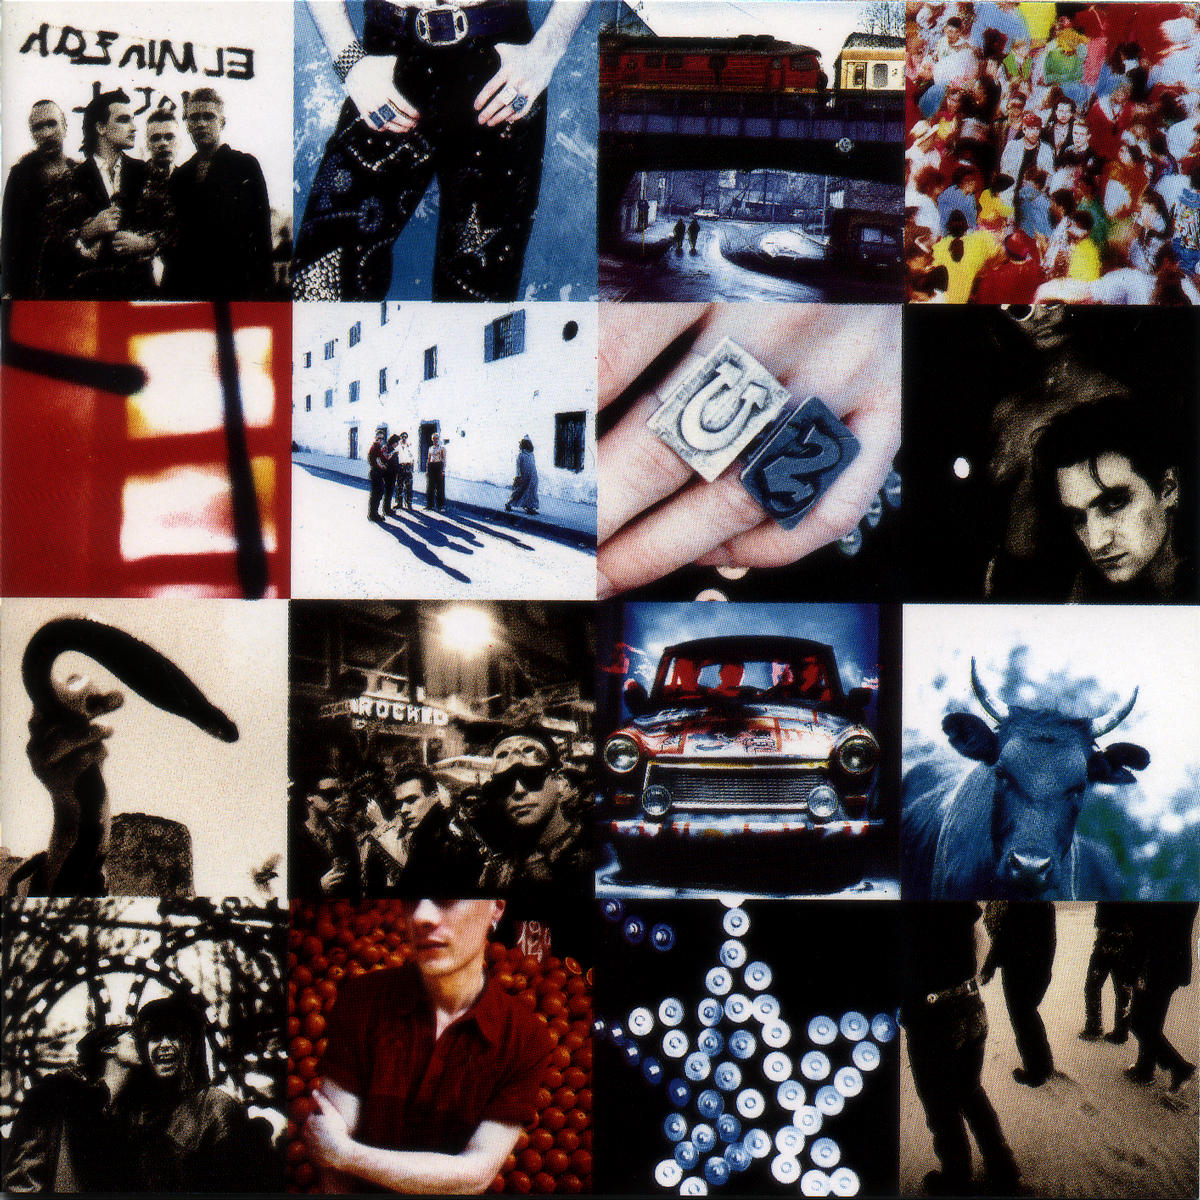 Achtung U2 (CD) (Remastered) - Baby -